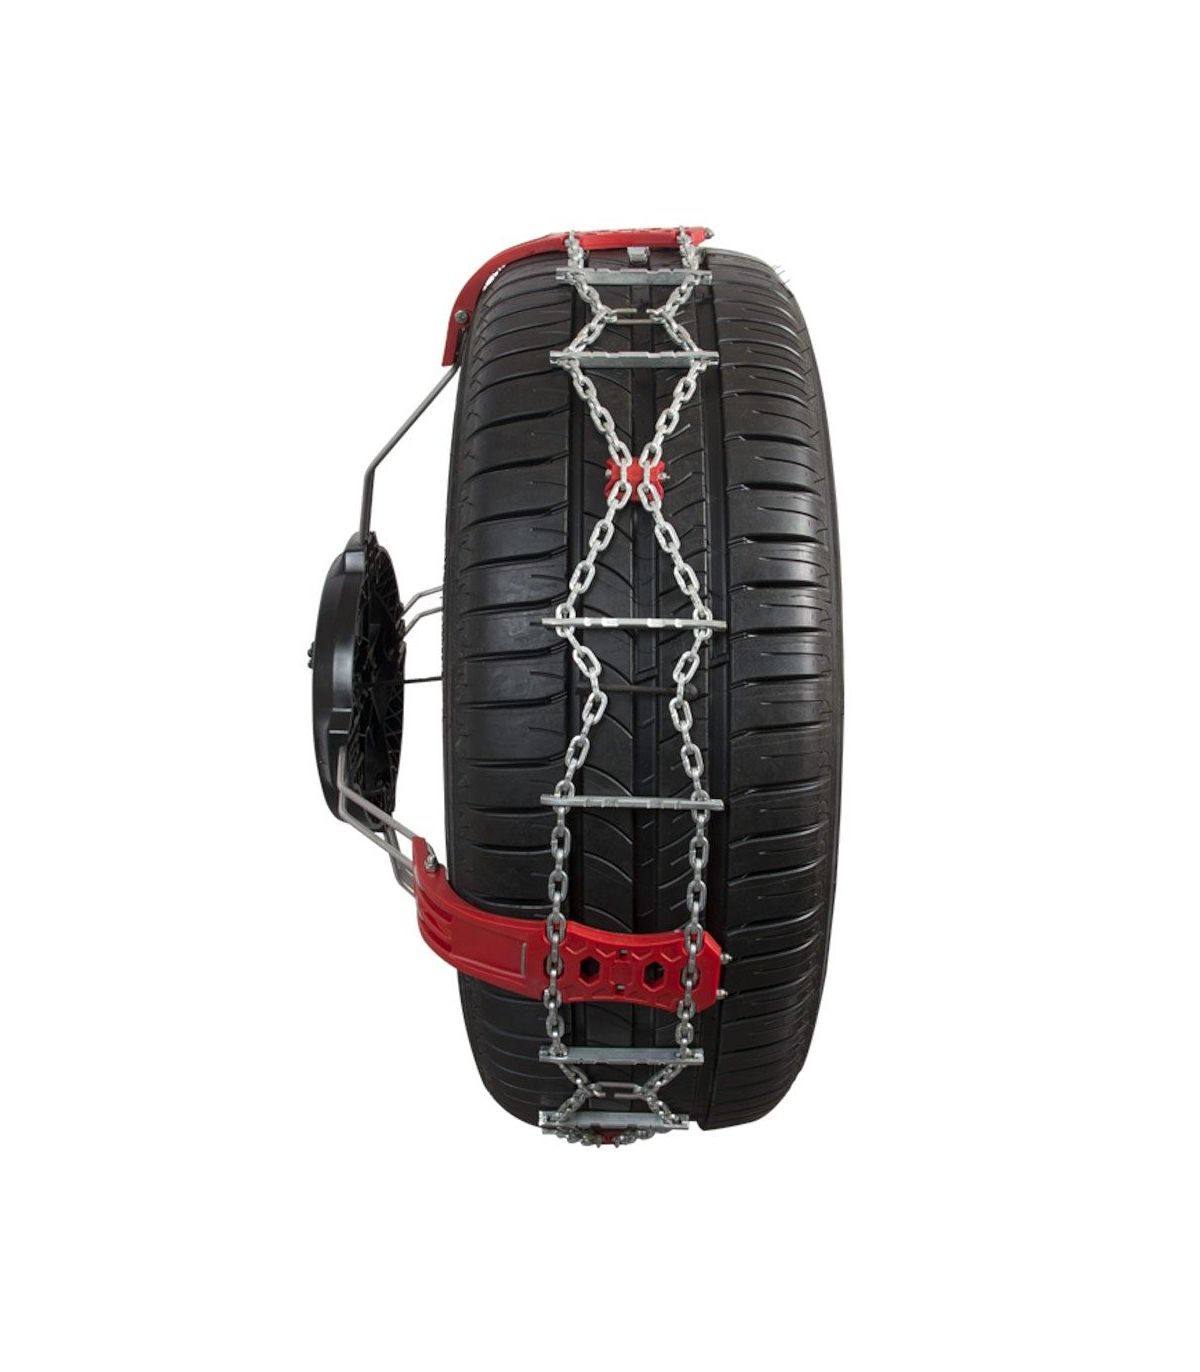 Chaines neige vehicule non chainable POLAIRE STEEL 60